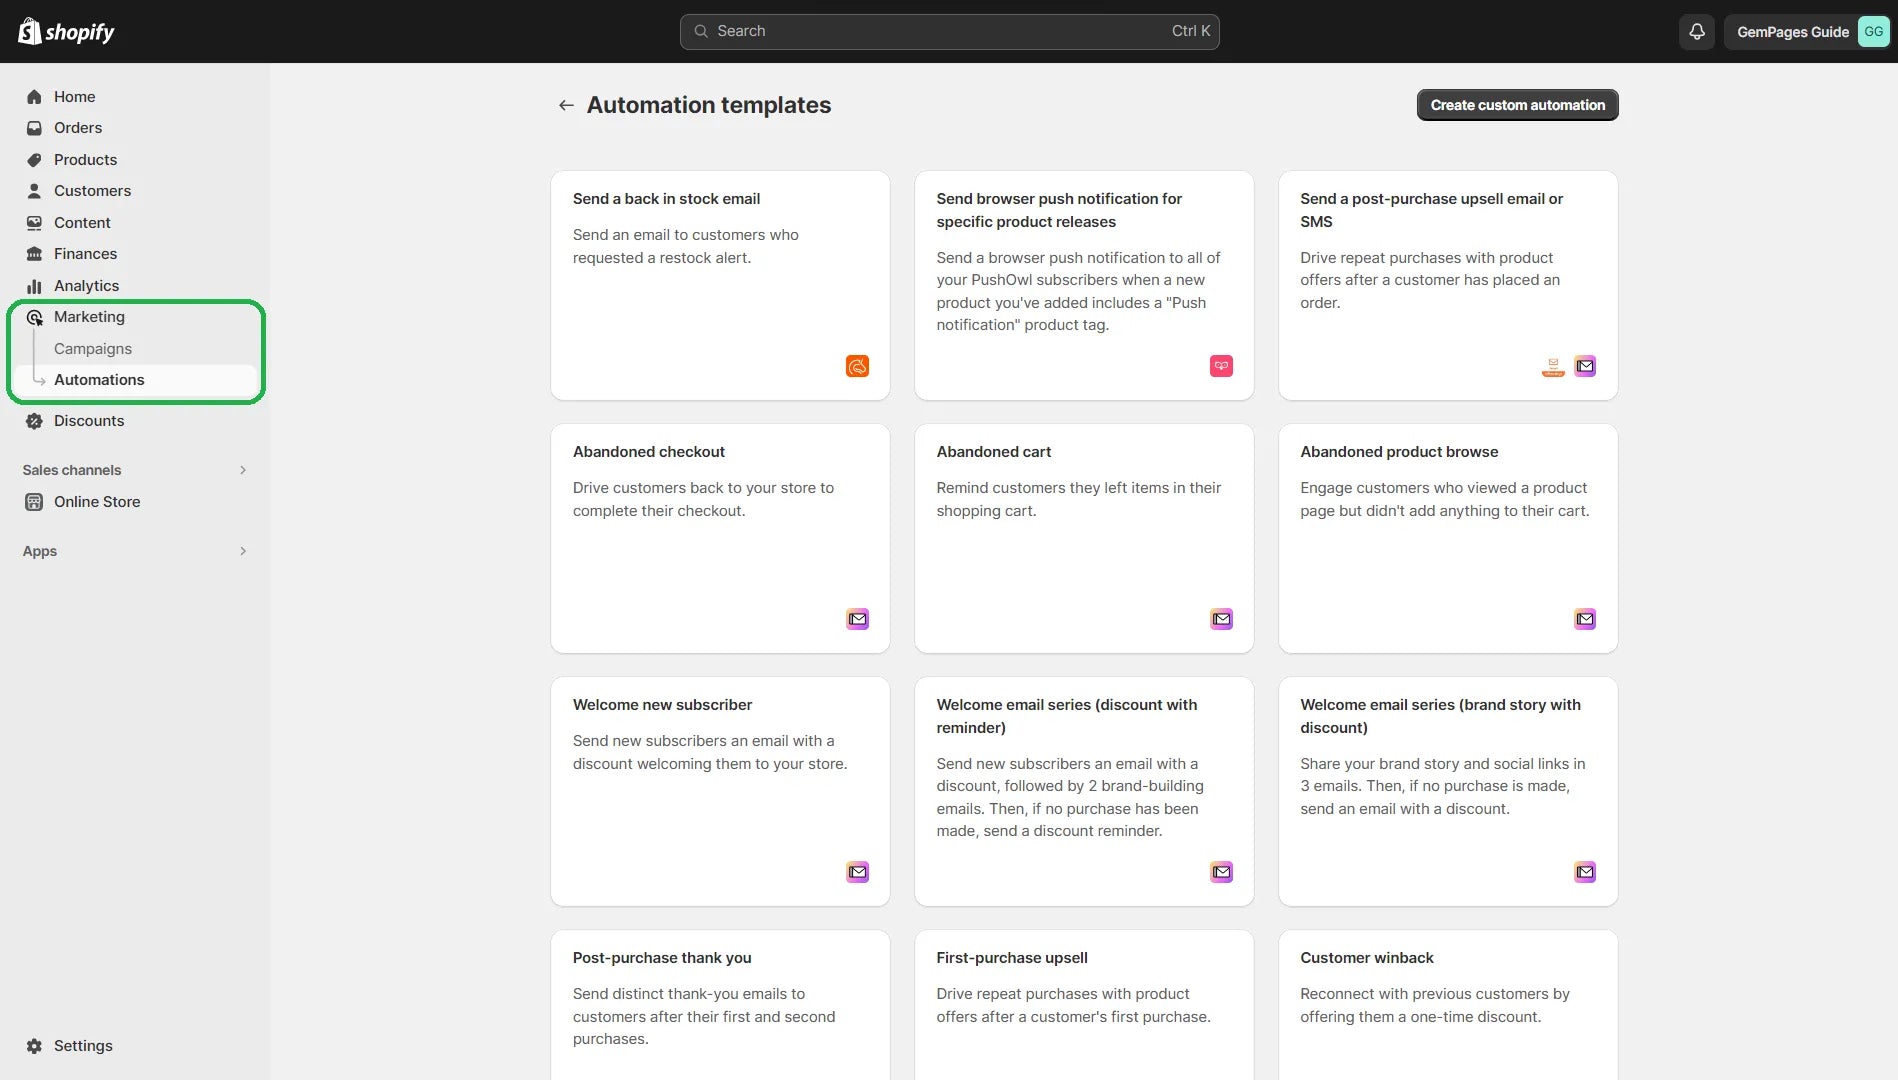 Marketing automations in Shopify admin